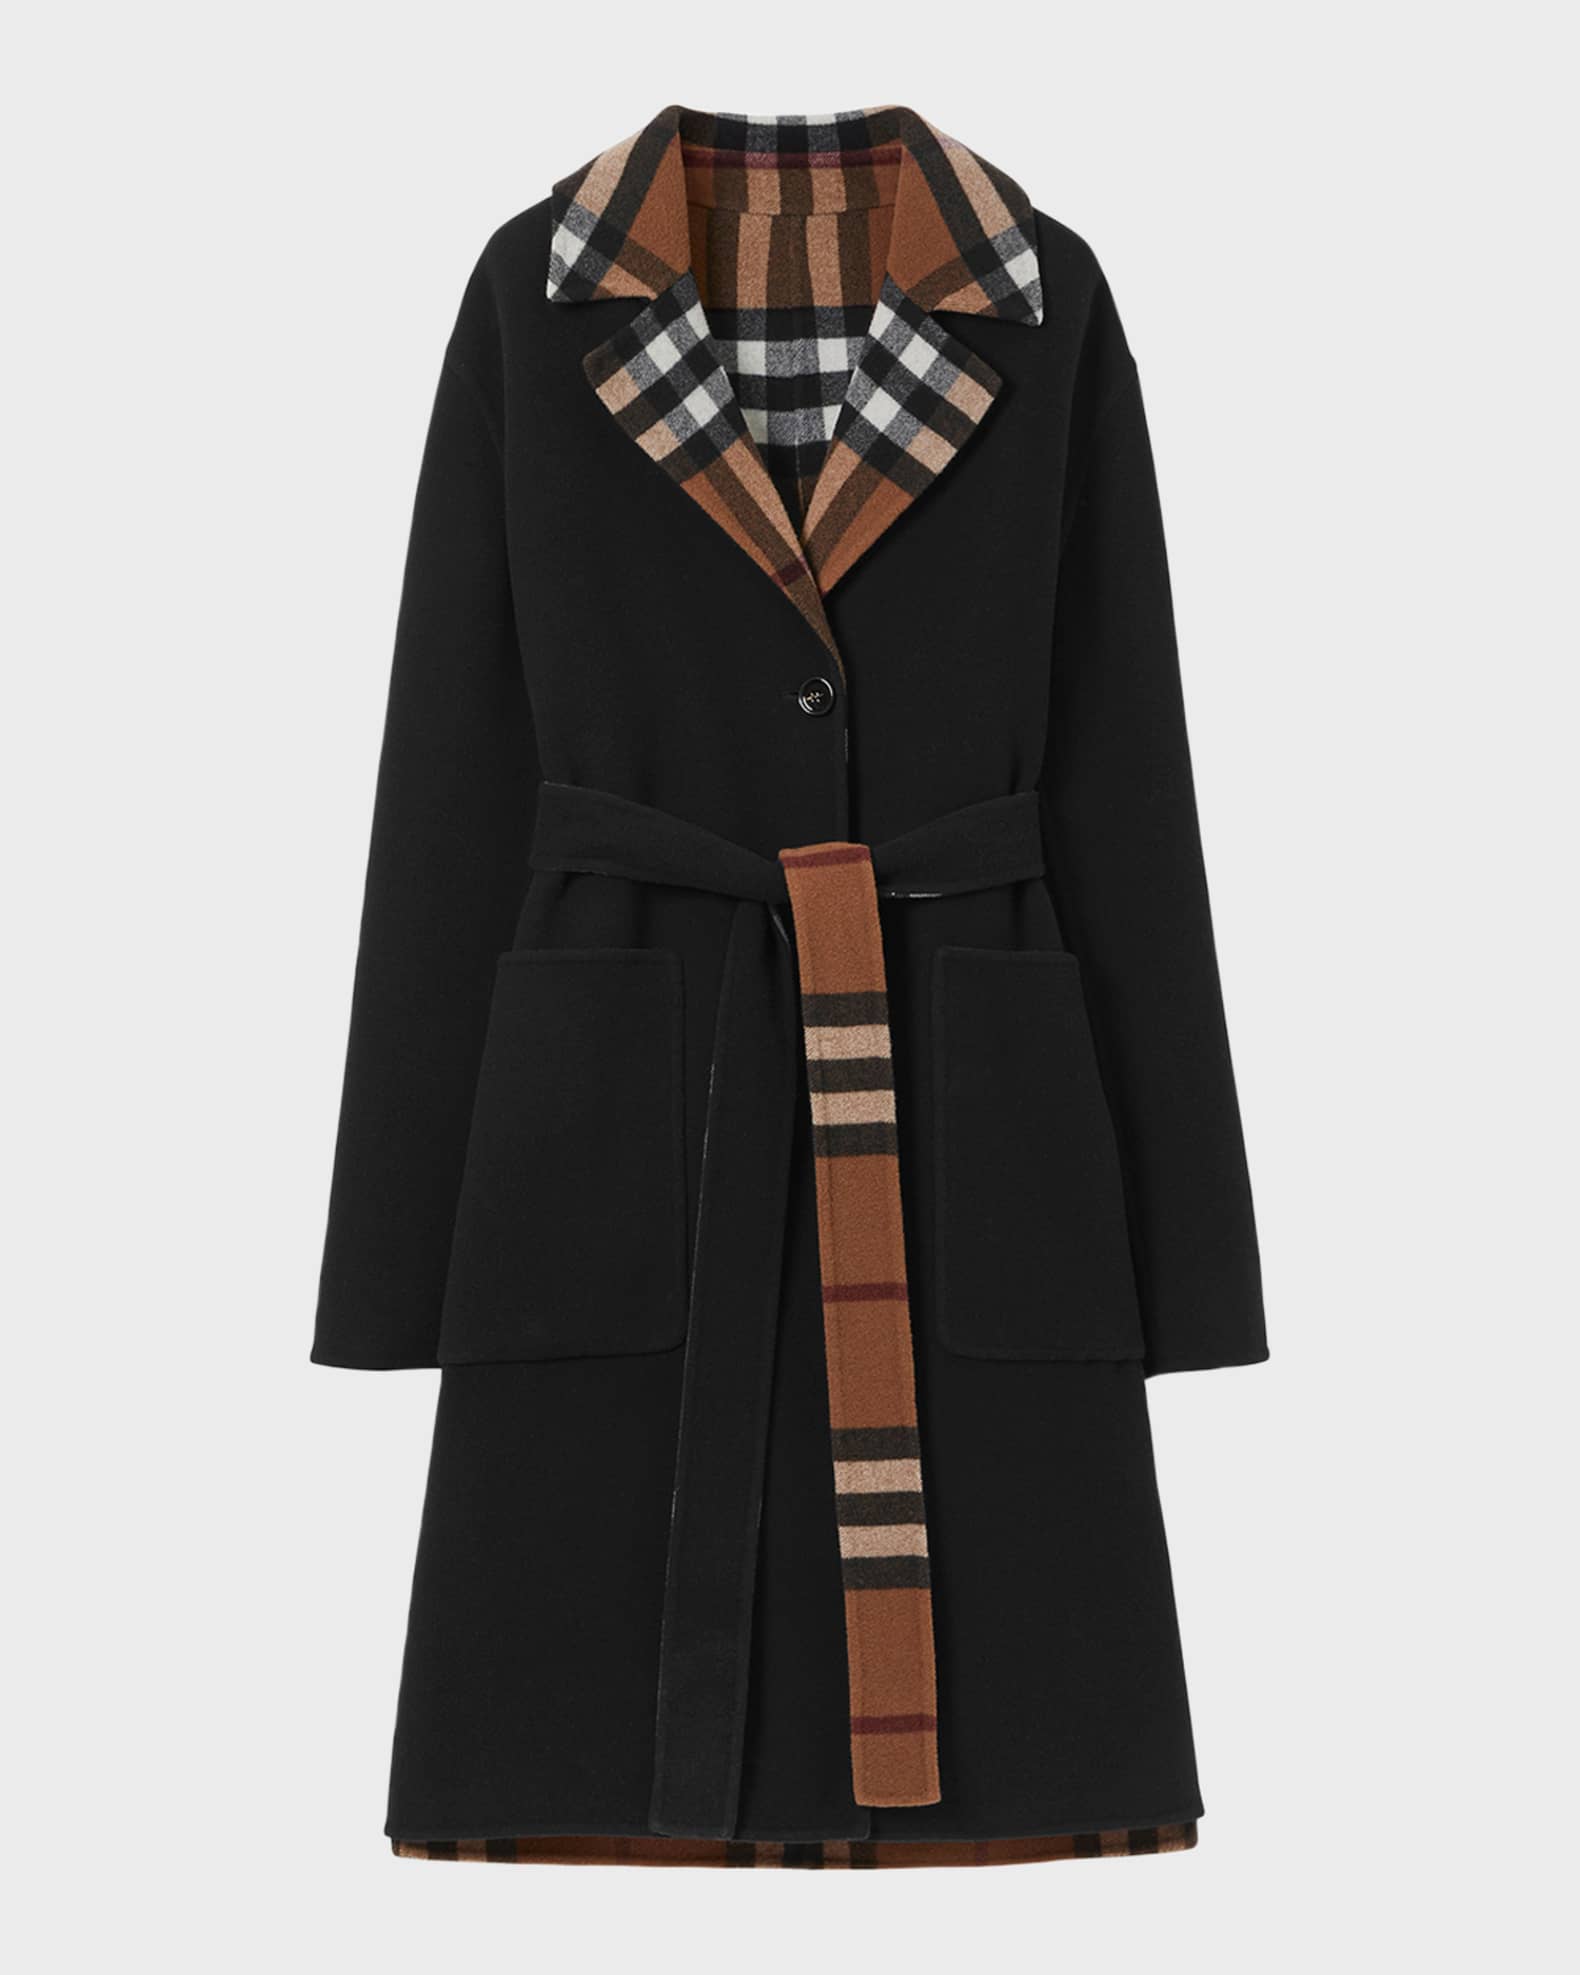 Burberry Belted Reversible Coat | Marcus